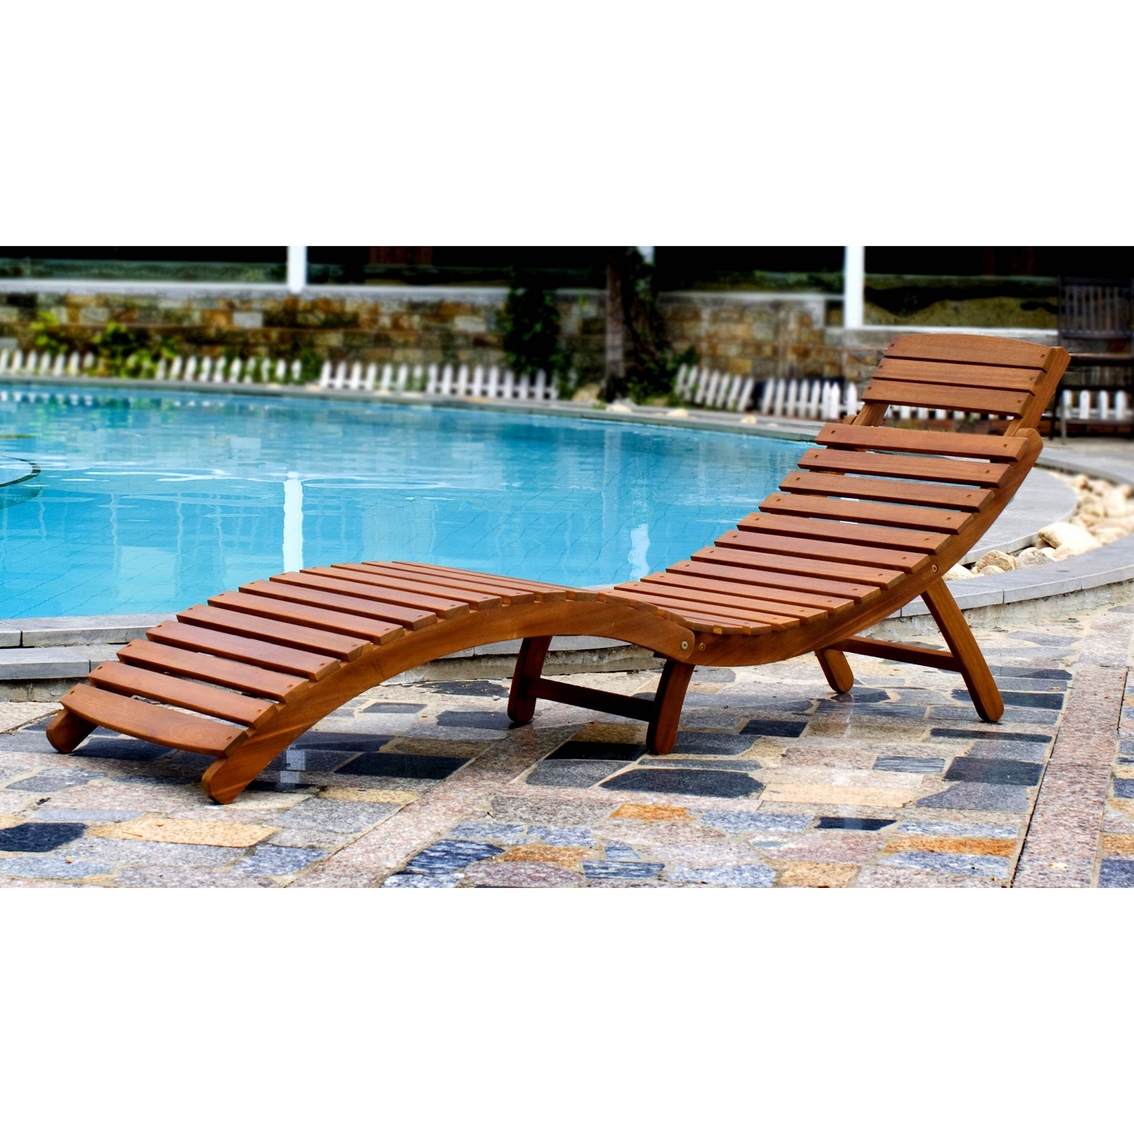 Northbeam Curved Folding Chaise Lounger - Image 2 of 4